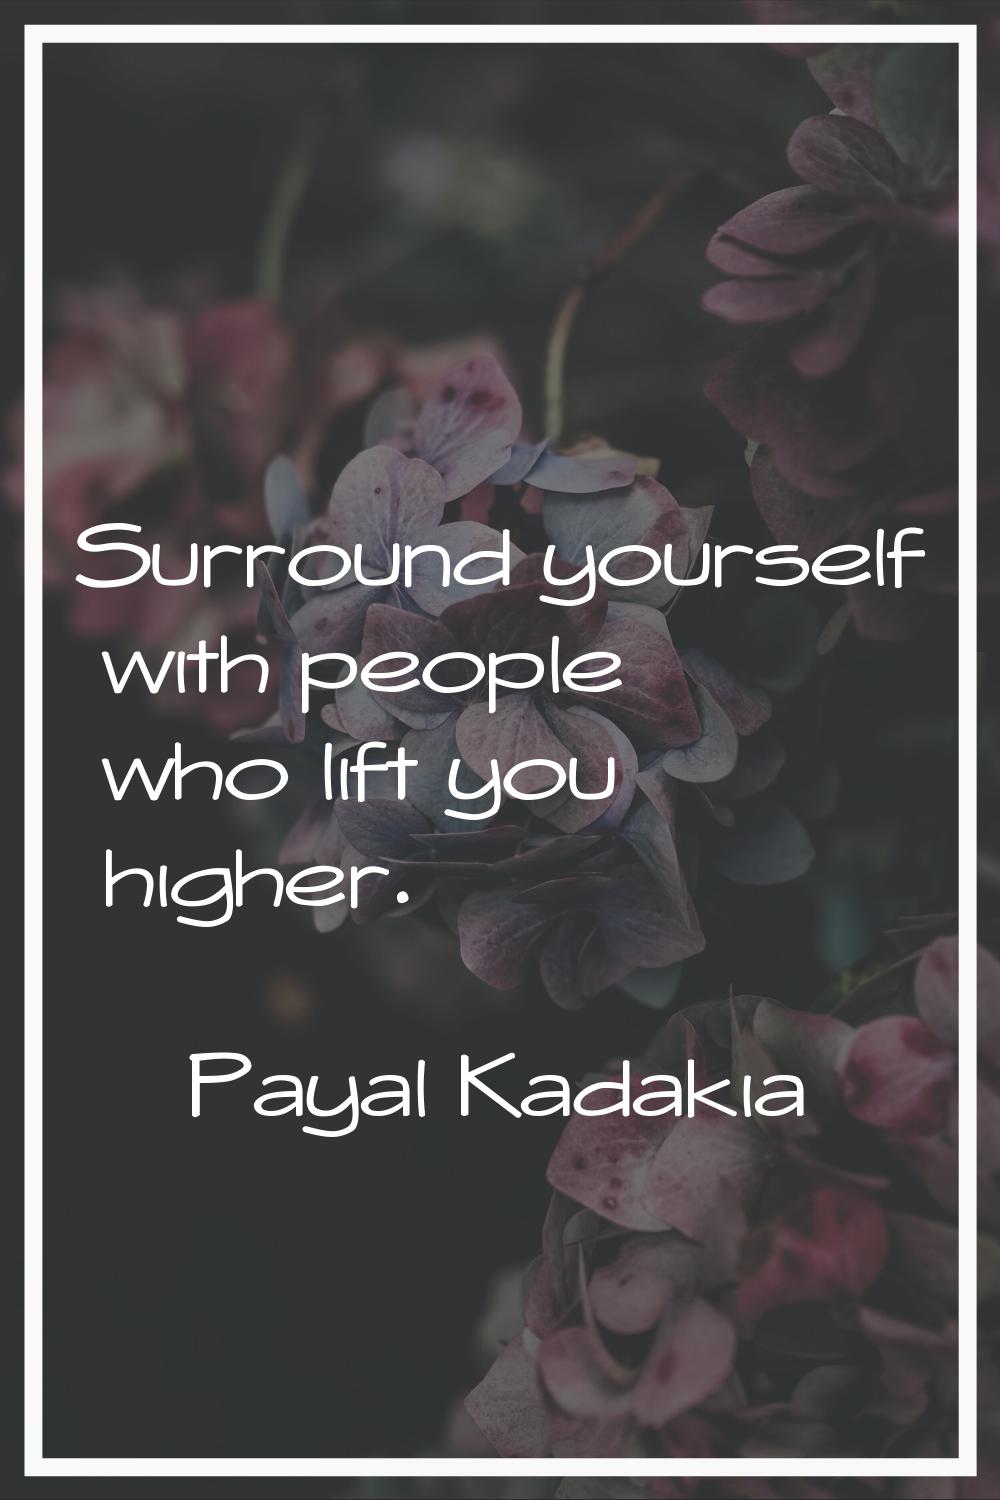 Surround yourself with people who lift you higher.